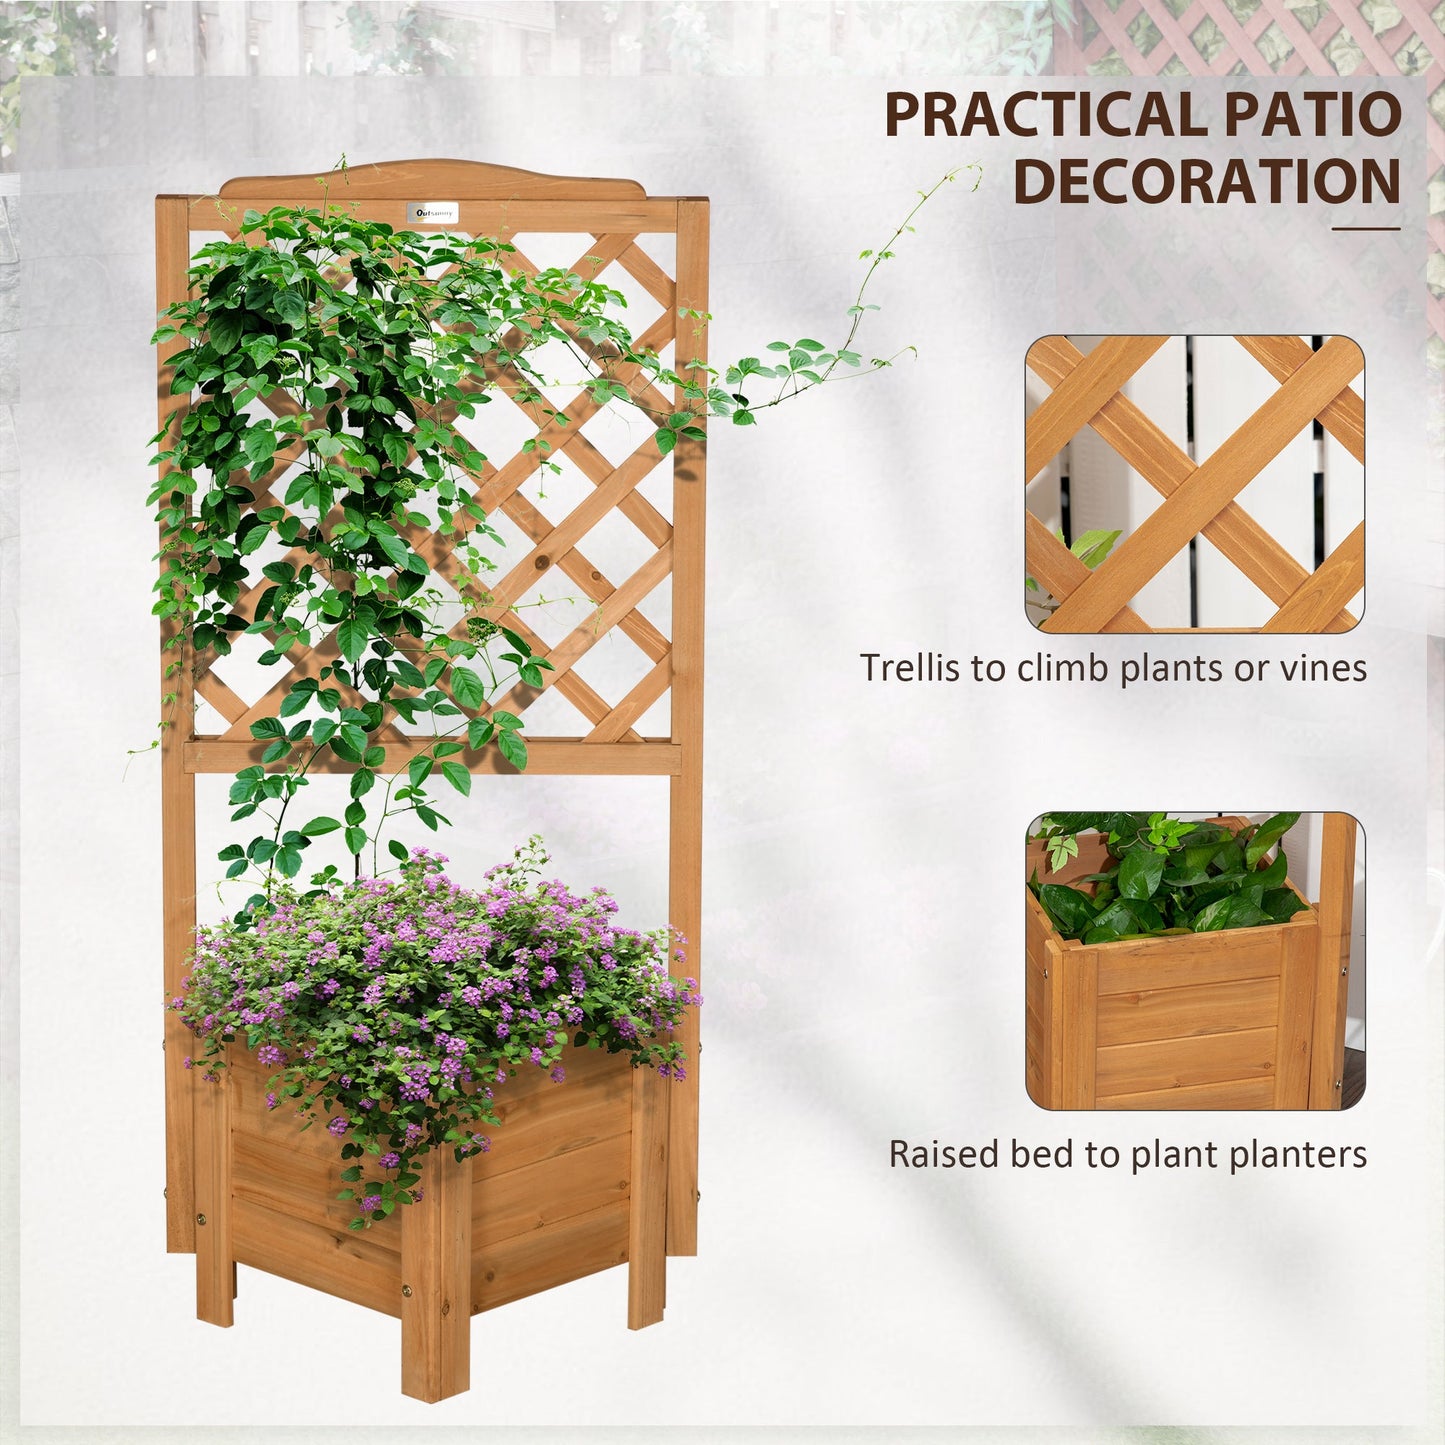 Wood Planter with Trellis, Raised Garden Bed to Grow Vegetables, Herbs, and Flowers for Backyard, Patio, Deck at Gallery Canada